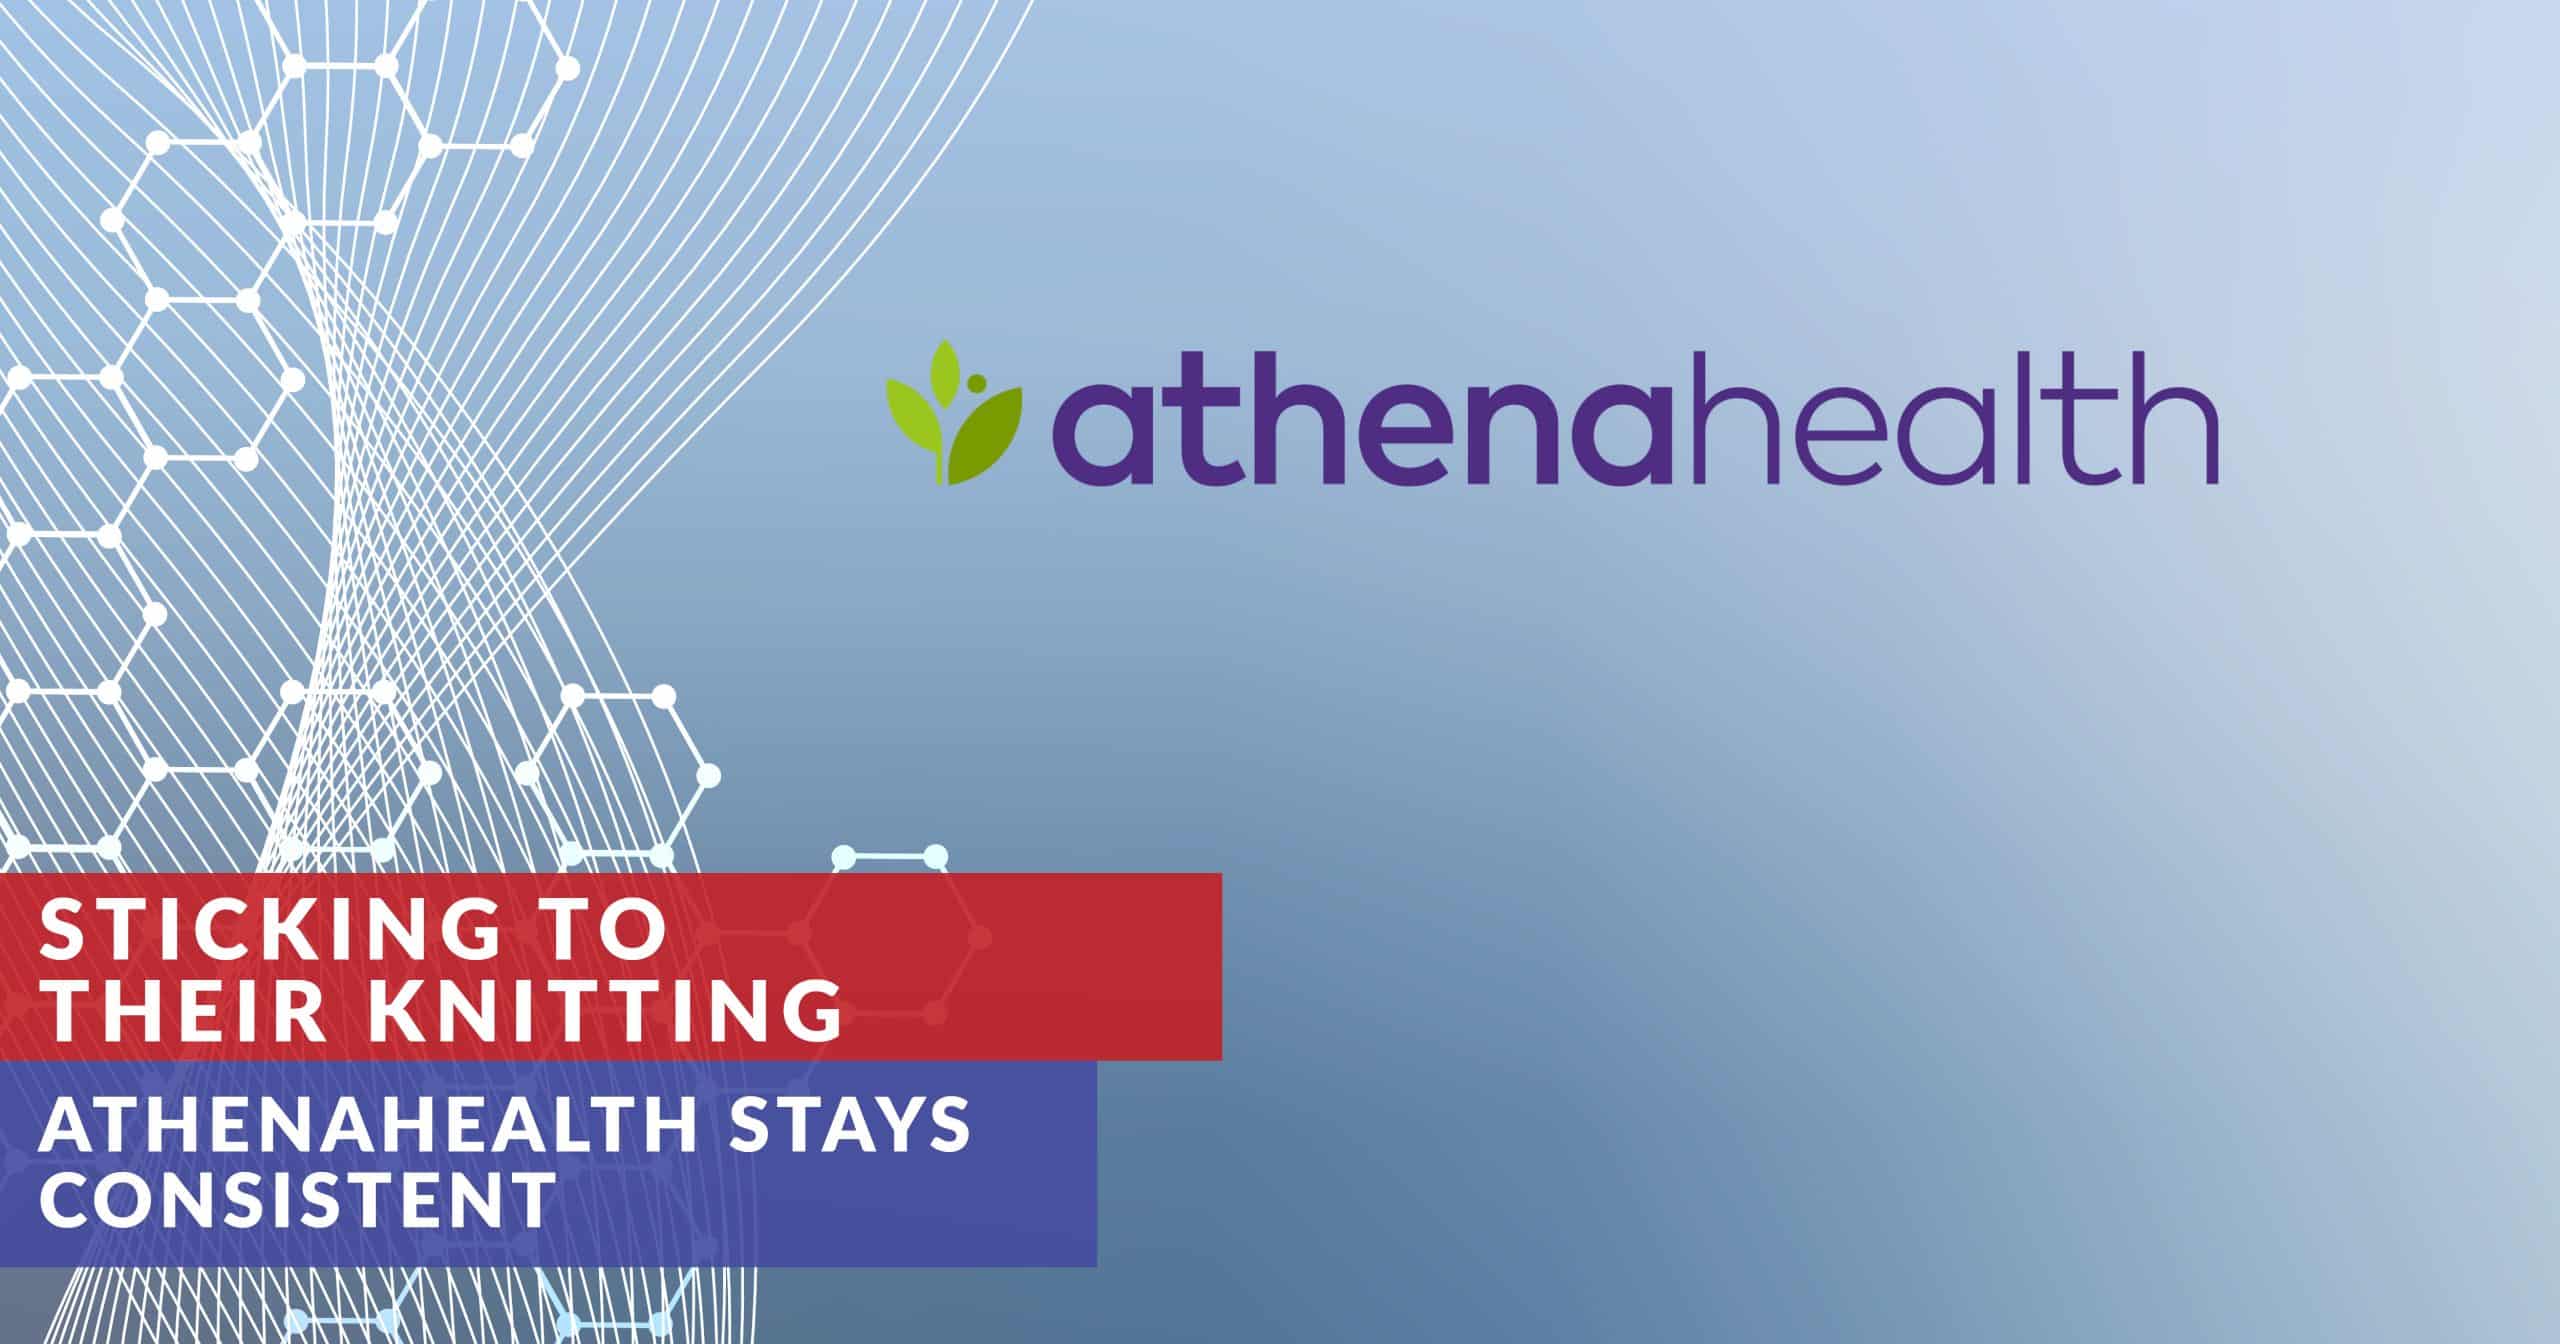 Sticking to Their Knitting: athenahealth Stays Consistent